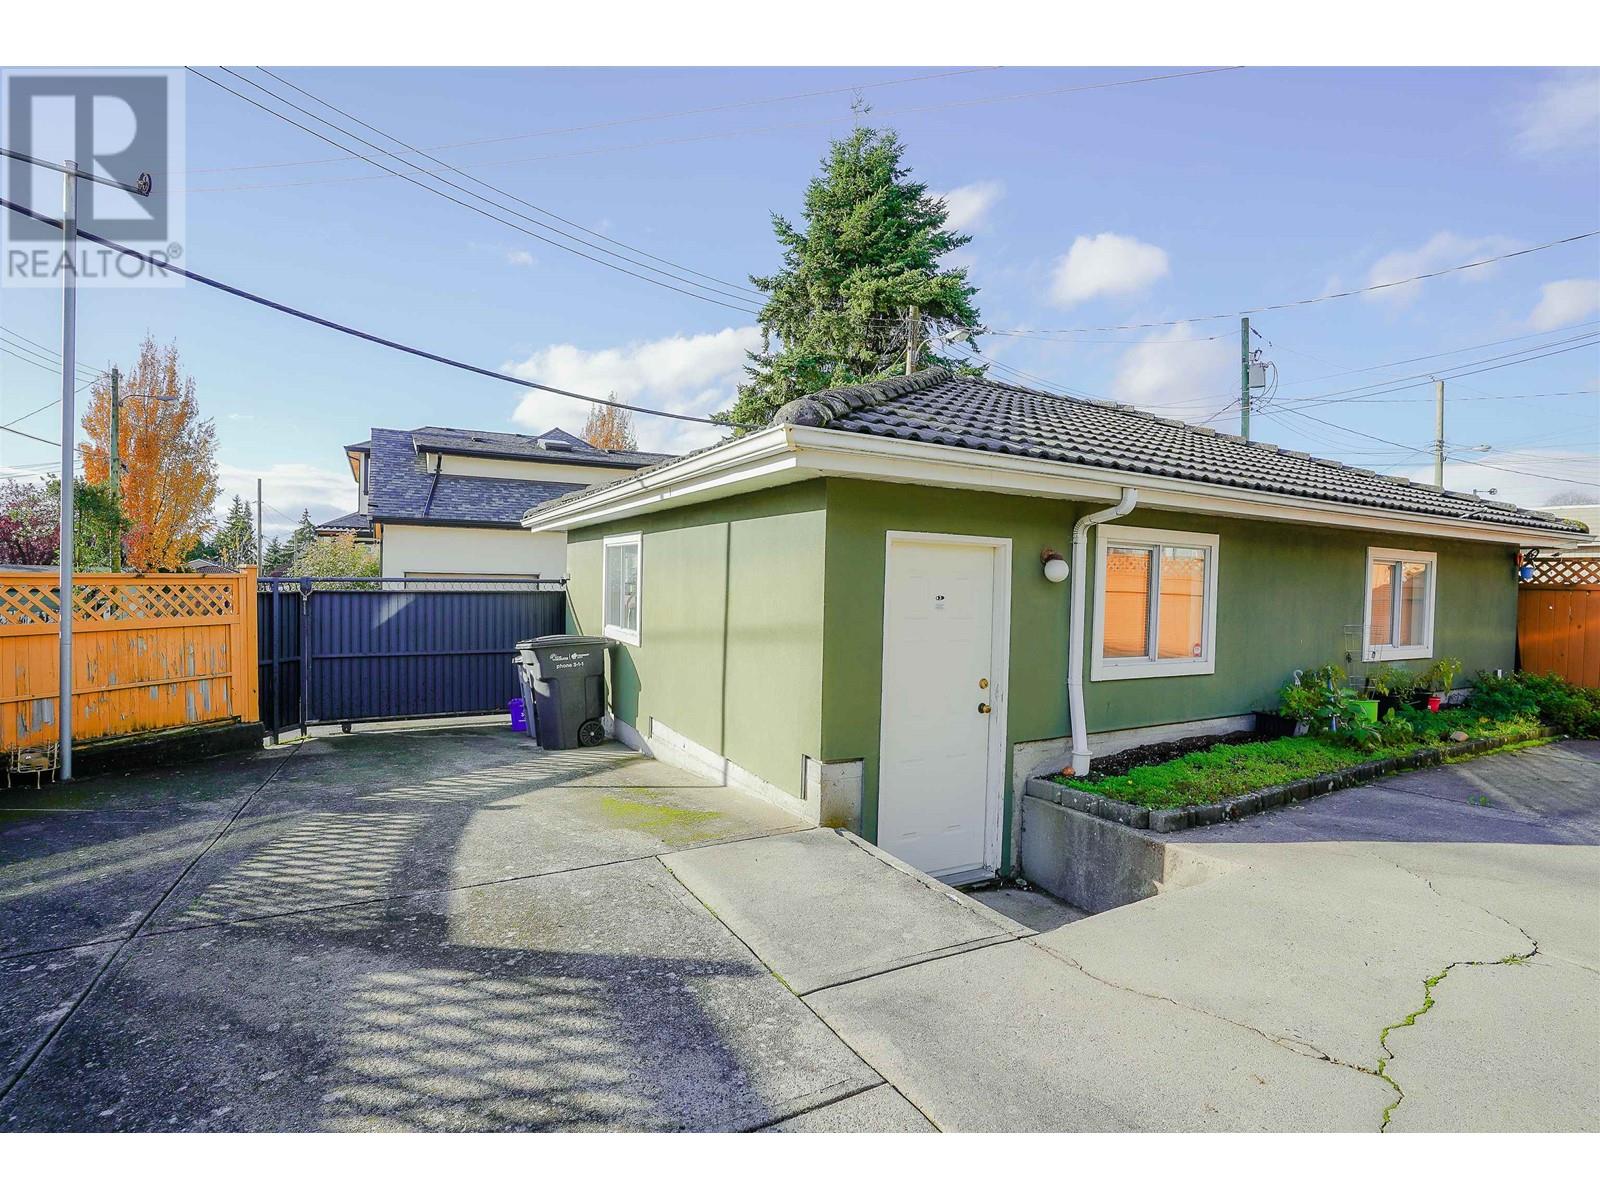 Listing Picture 33 of 34 : 7463 GLADSTONE STREET, Vancouver / 溫哥華 - 魯藝地產 Yvonne Lu Group - MLS Medallion Club Member